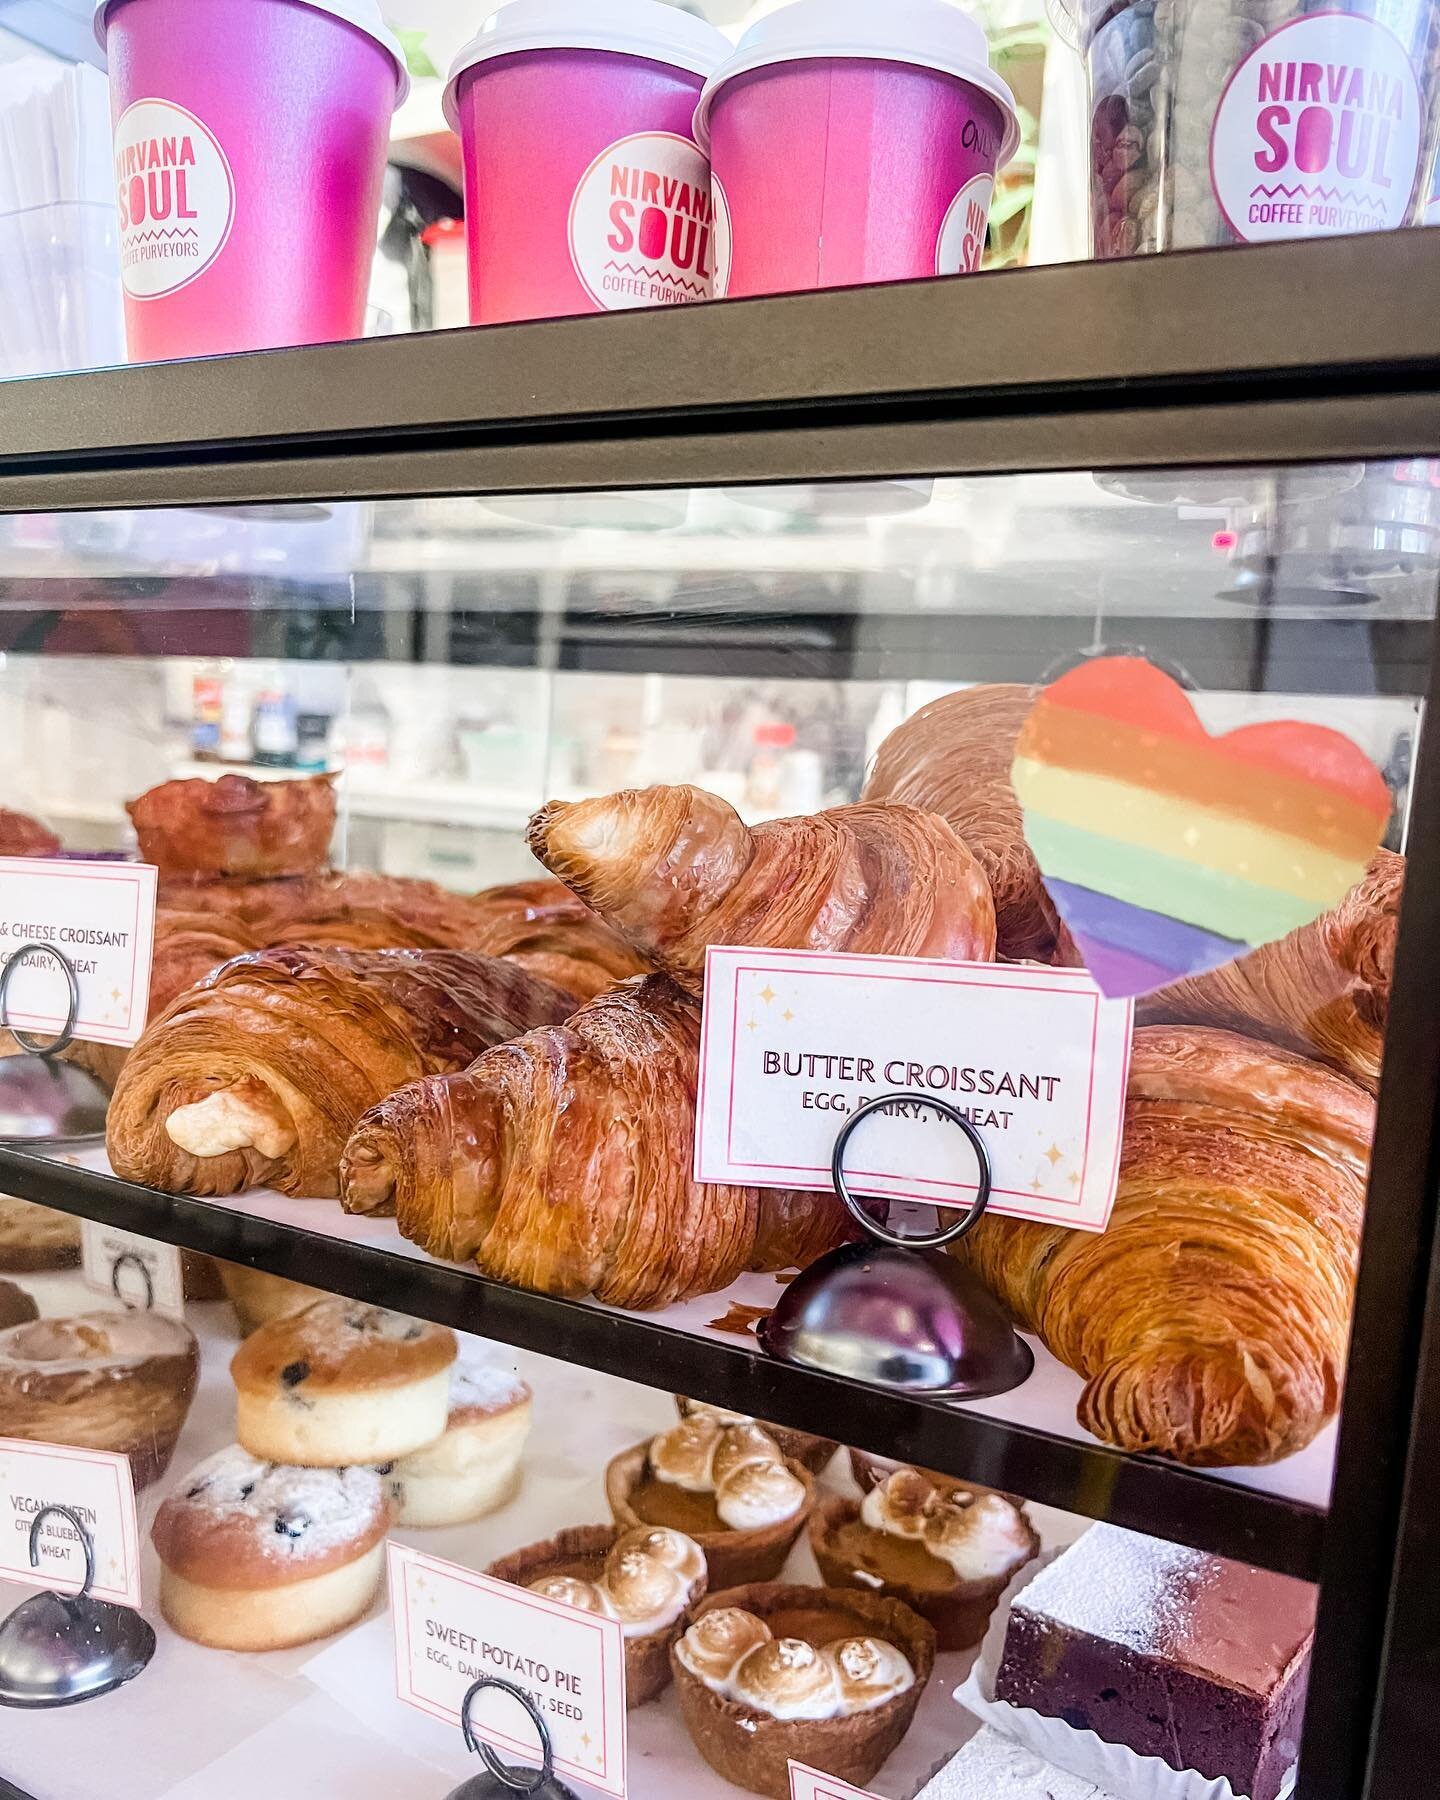 New week, and it doesn&rsquo;t get any fresher than this! 🥐 How was your Mother&rsquo;s Day weekend? We hope you had an amazing time! 💗

And now we&rsquo;re back to it with ☕️🍵🧇🍪🥤🥐🥧🍷🍺 + more. If you&rsquo;ve been thinking about coming by, h